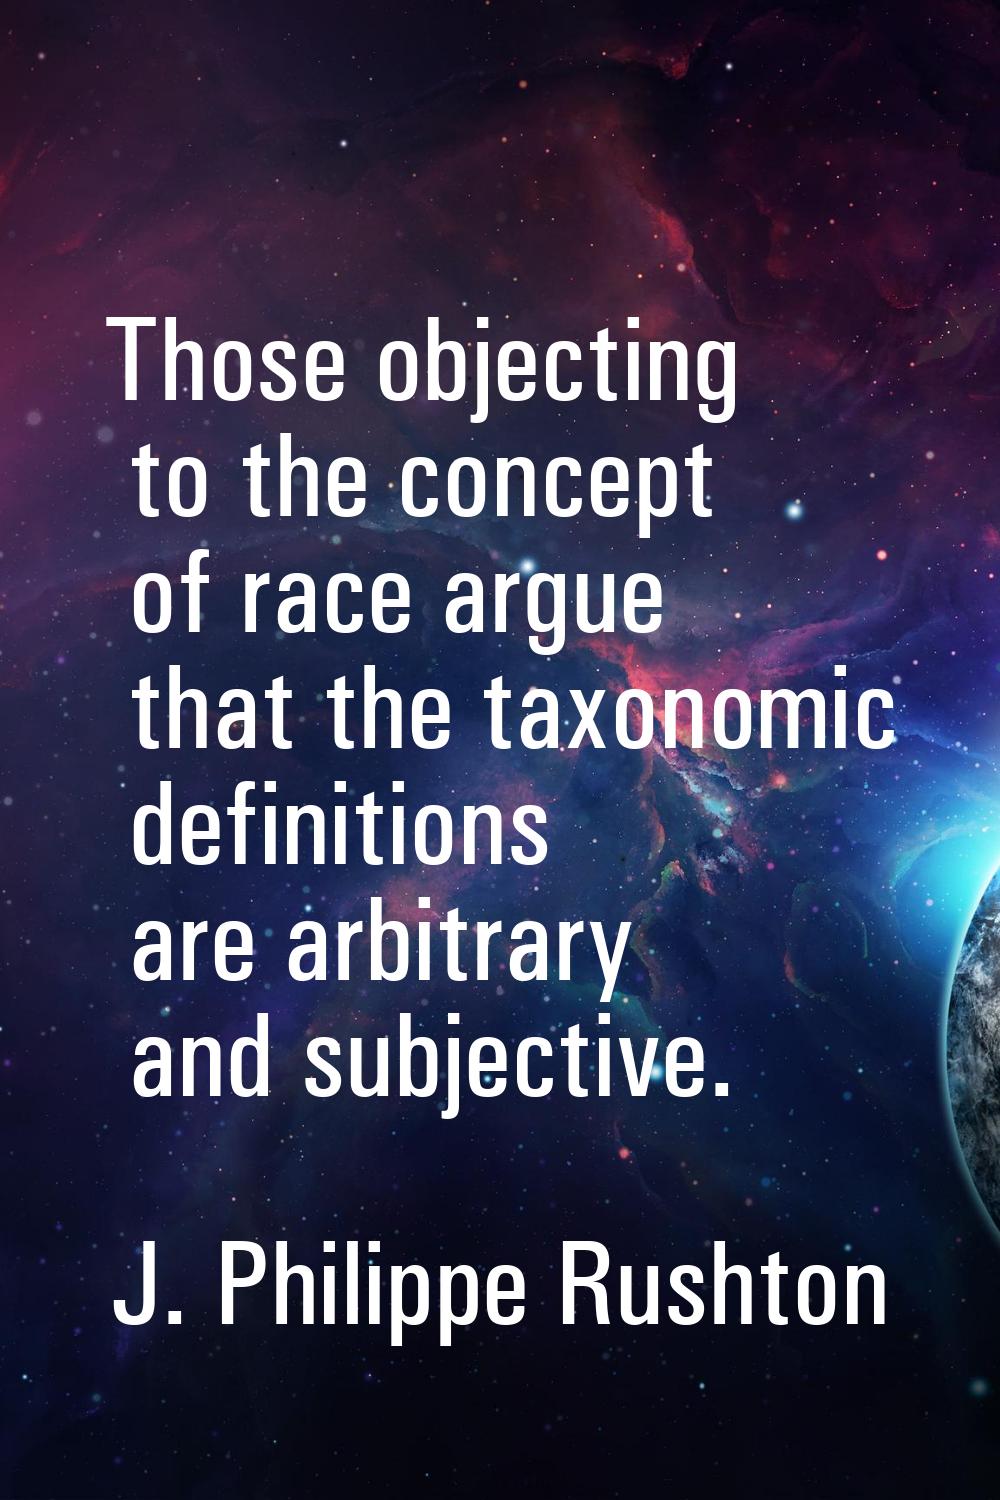 Those objecting to the concept of race argue that the taxonomic definitions are arbitrary and subje